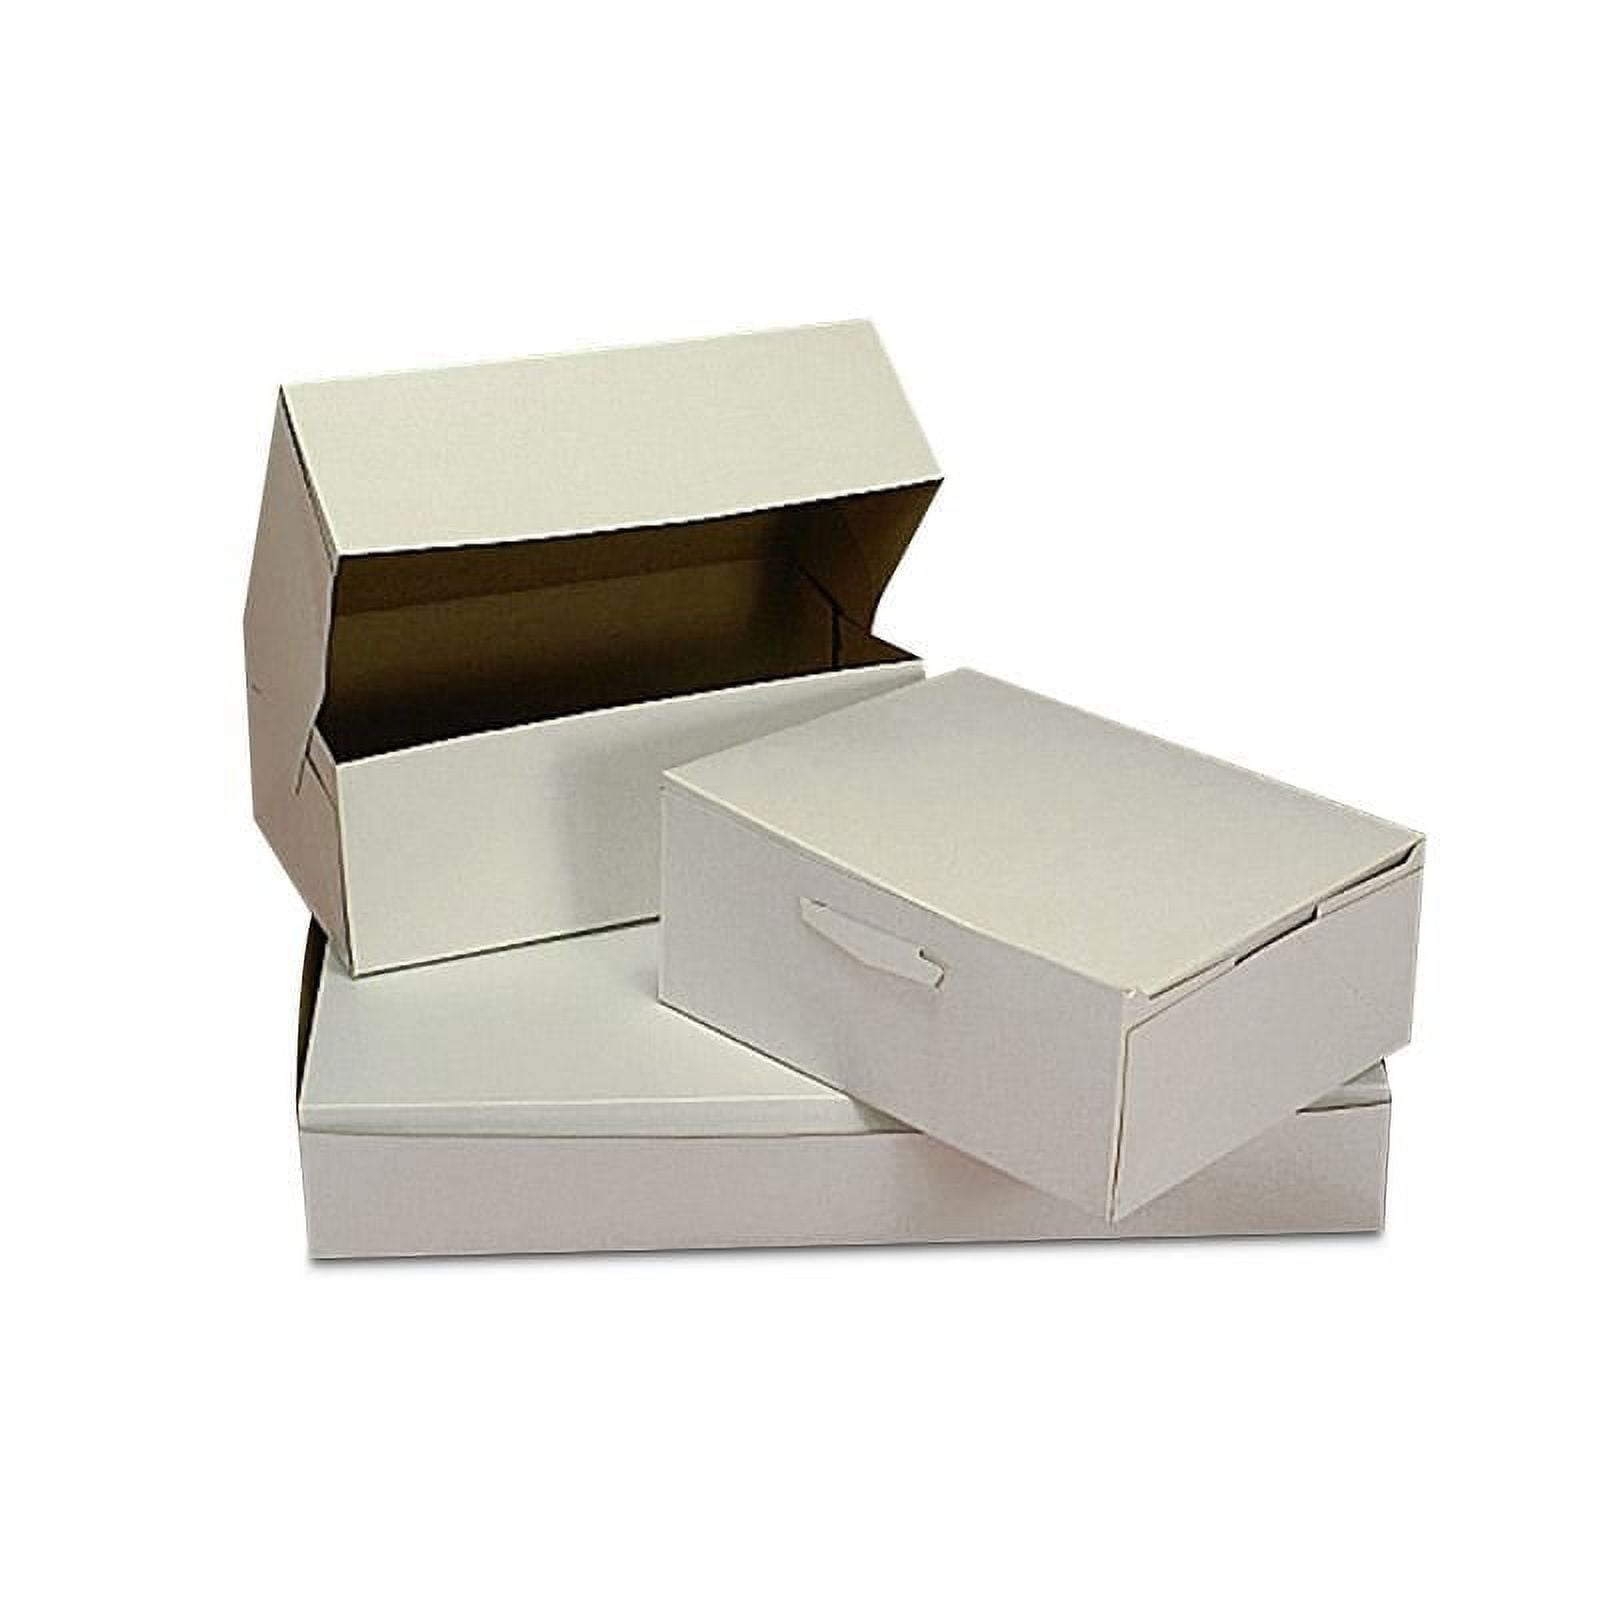 Sweet Vision Square Clear Plastic Cake Box - White Lid and White Base, Gray  Ribbon - 10'' x 10'' x 8 1/4'' - 10 count box